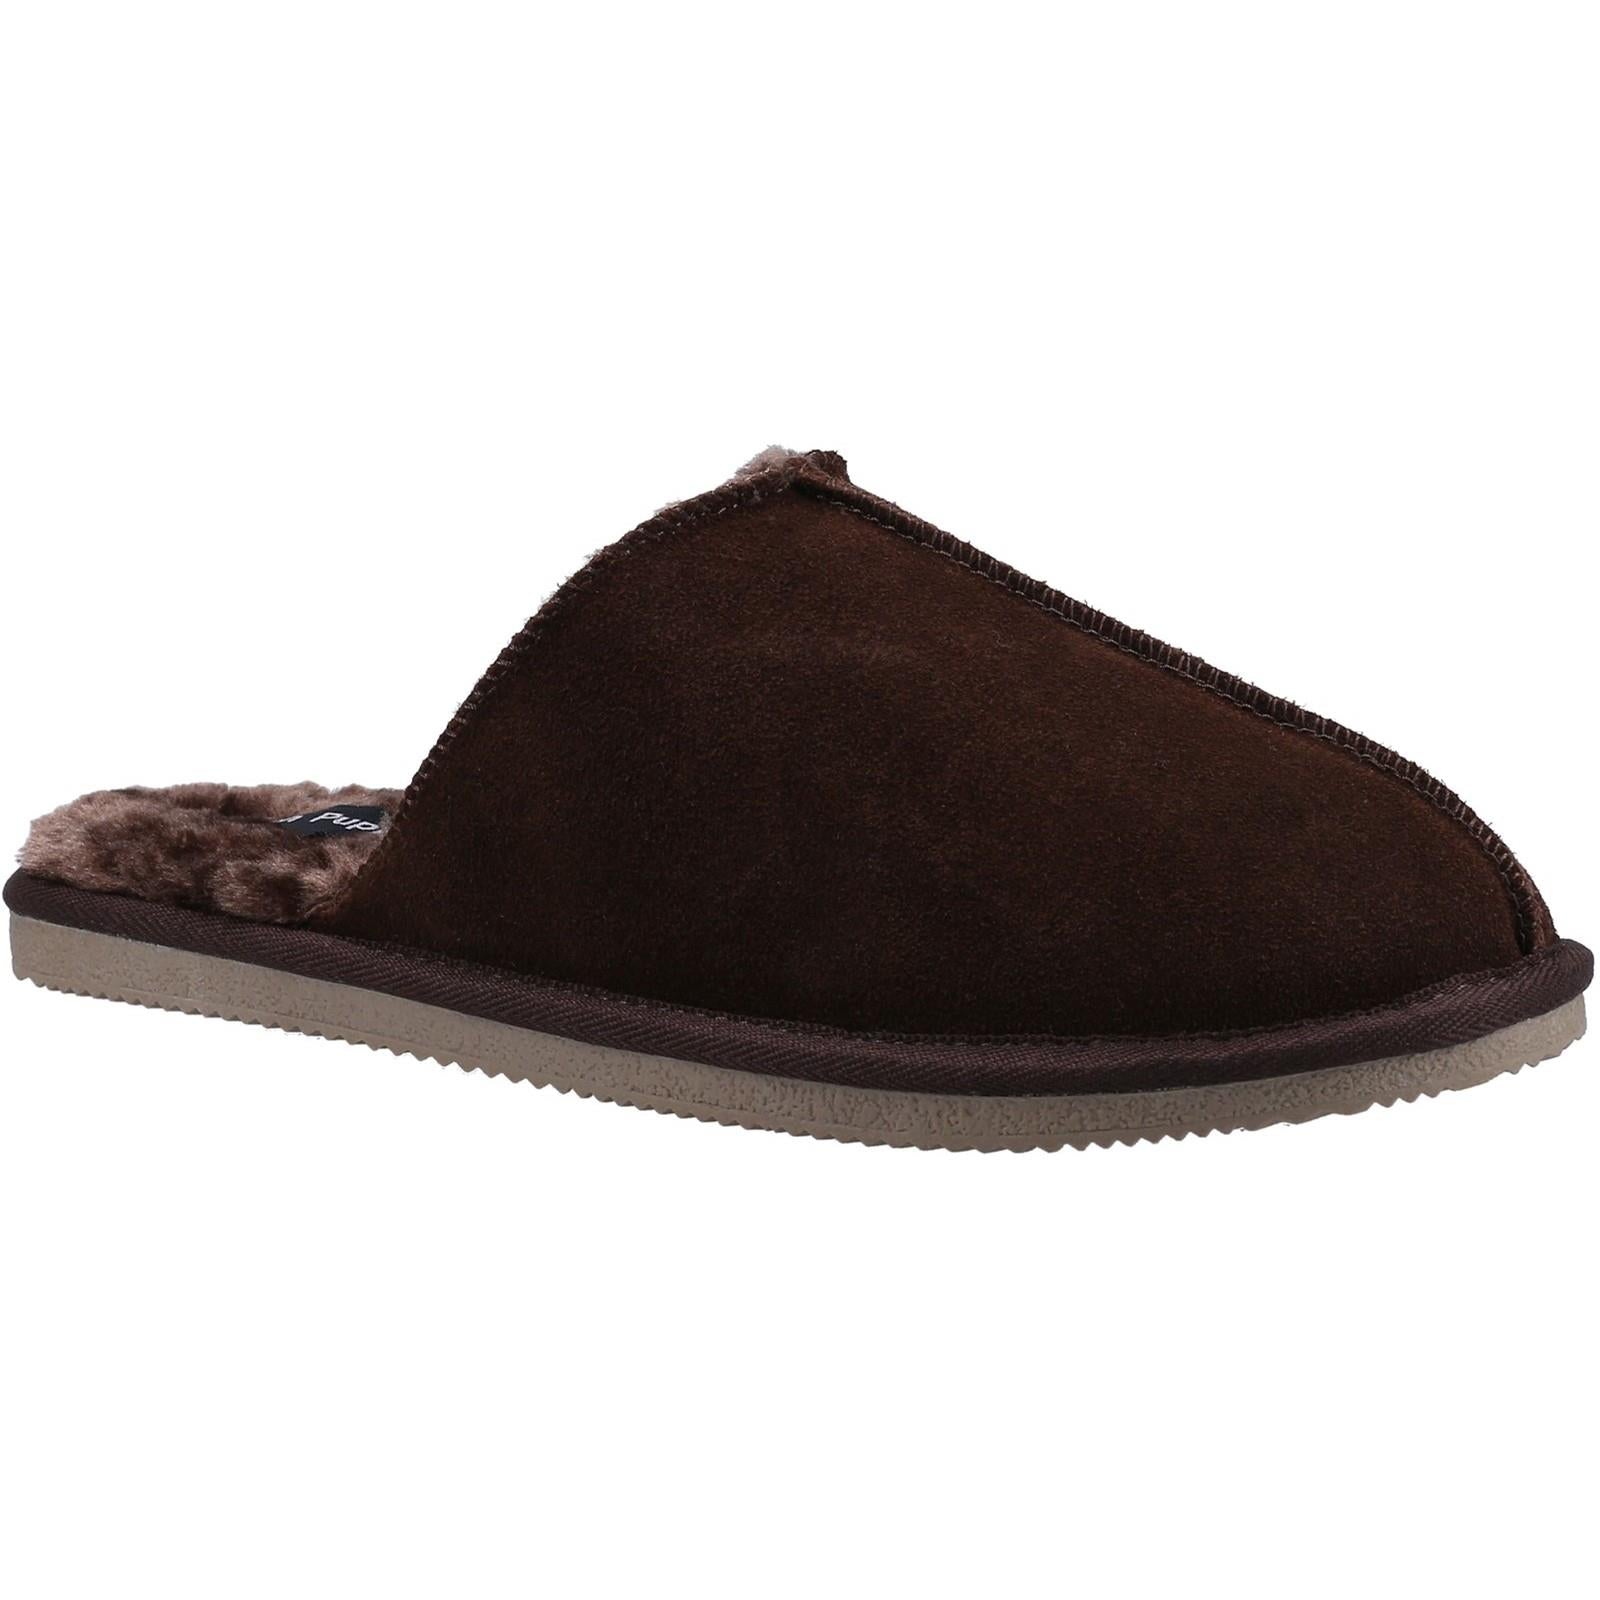 Hush Puppies Coady brown suede memory foam comfy fur lined mule slippers